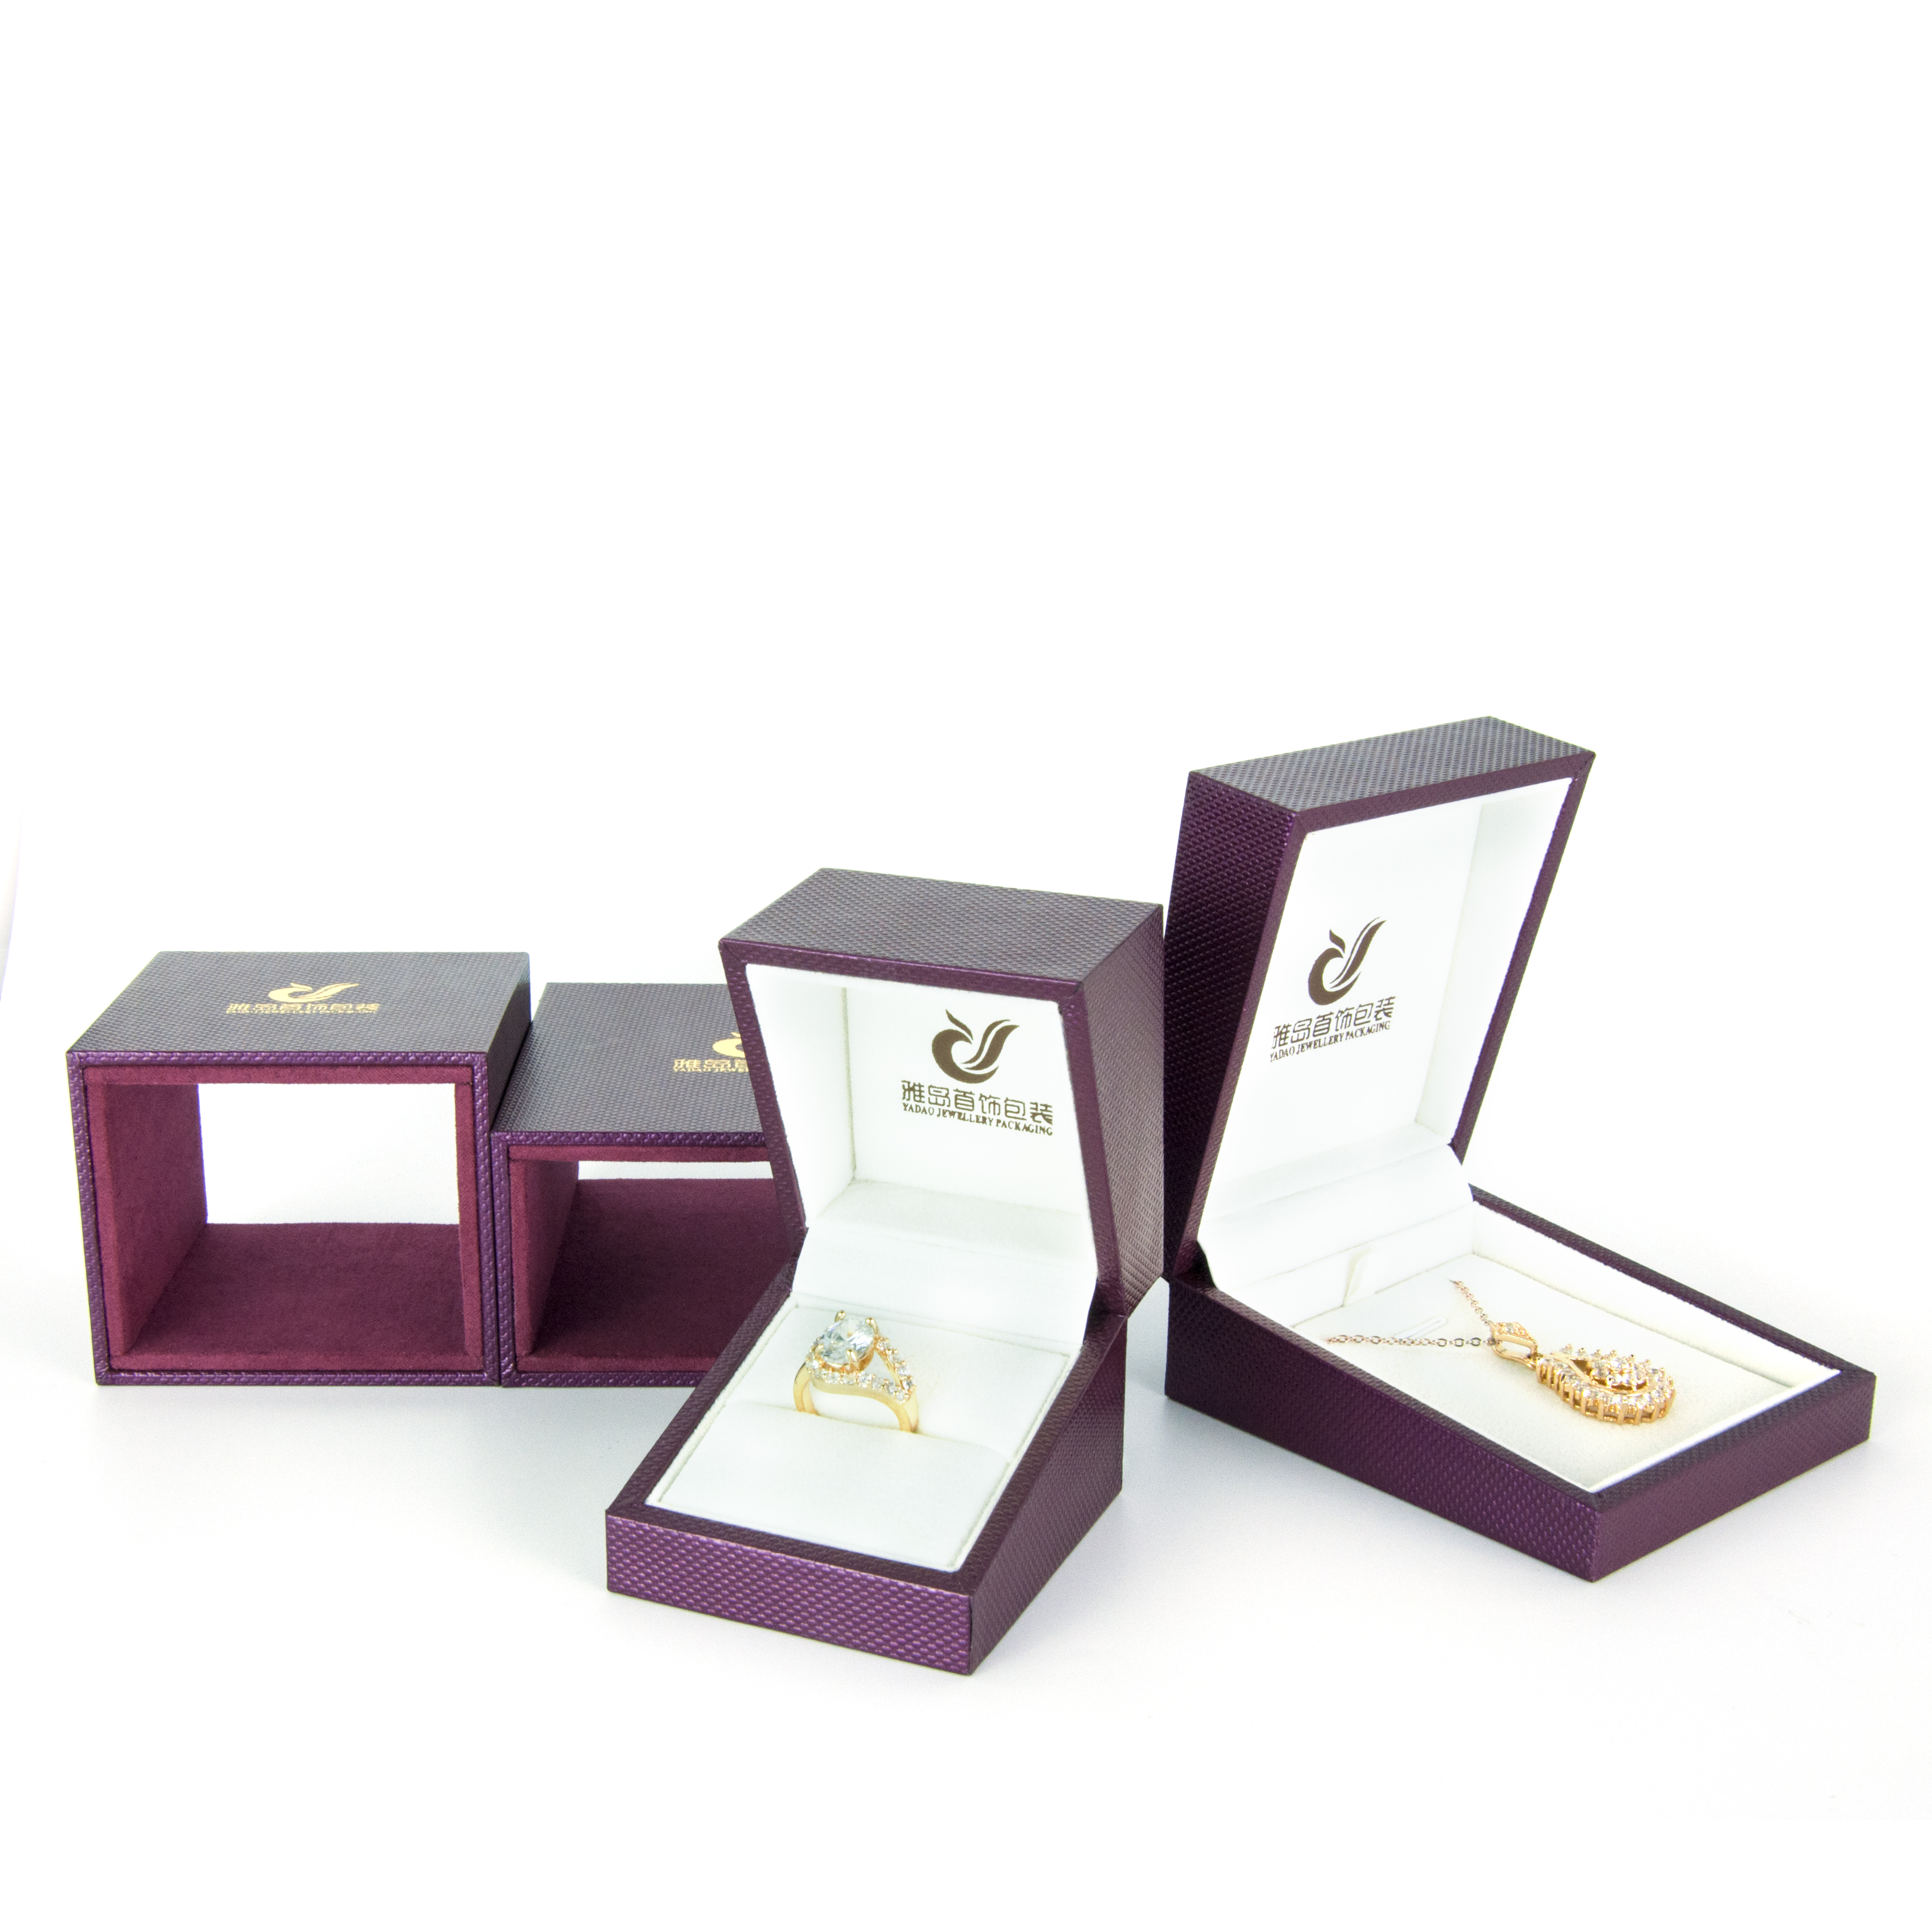 Yadao Luxury Jewelry Box Widened Style Ring Pendant Earrings Packaging Box Logo with Gold in Color